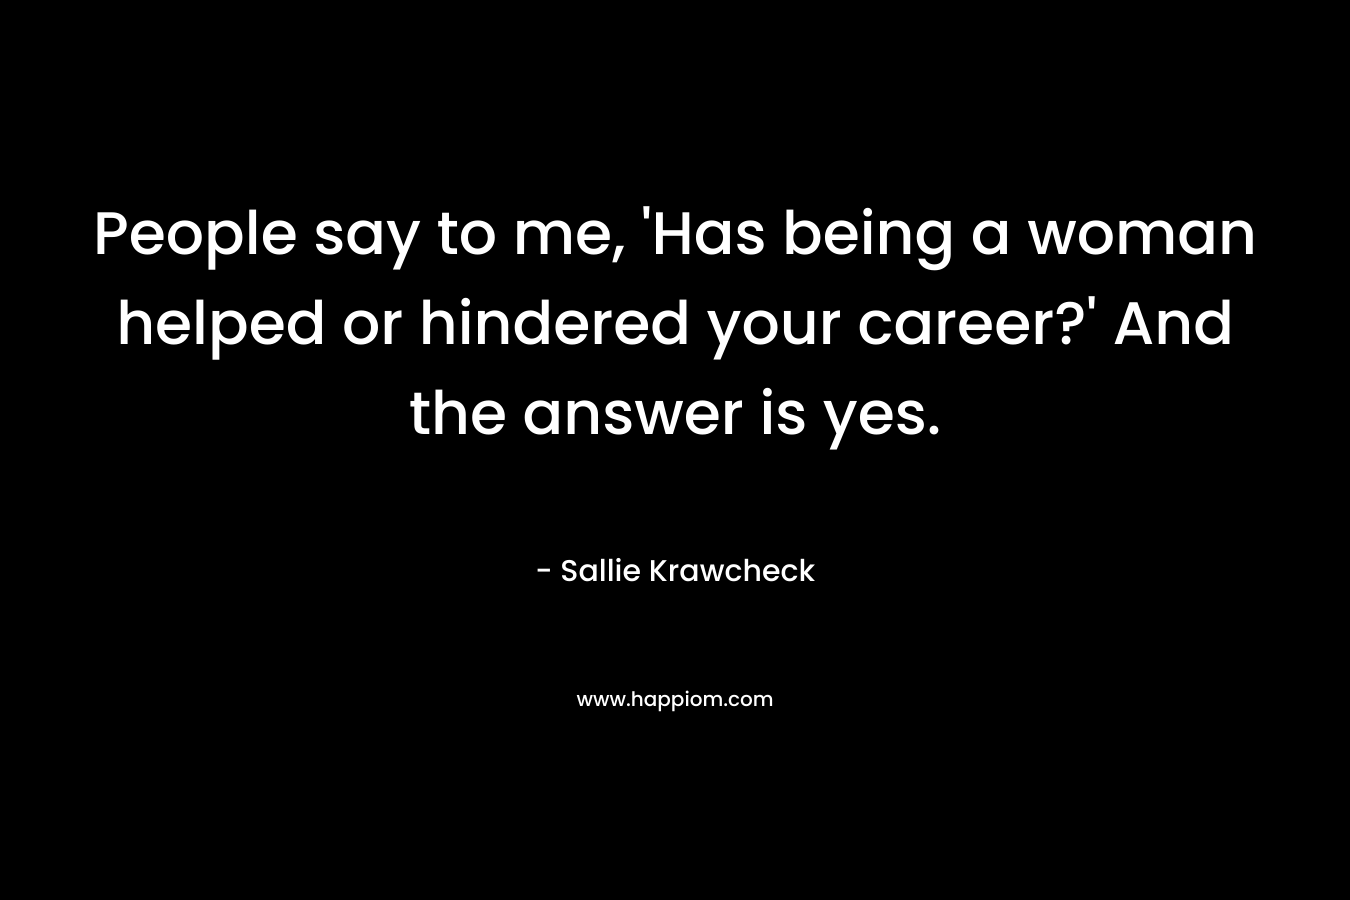 People say to me, ‘Has being a woman helped or hindered your career?’ And the answer is yes. – Sallie Krawcheck